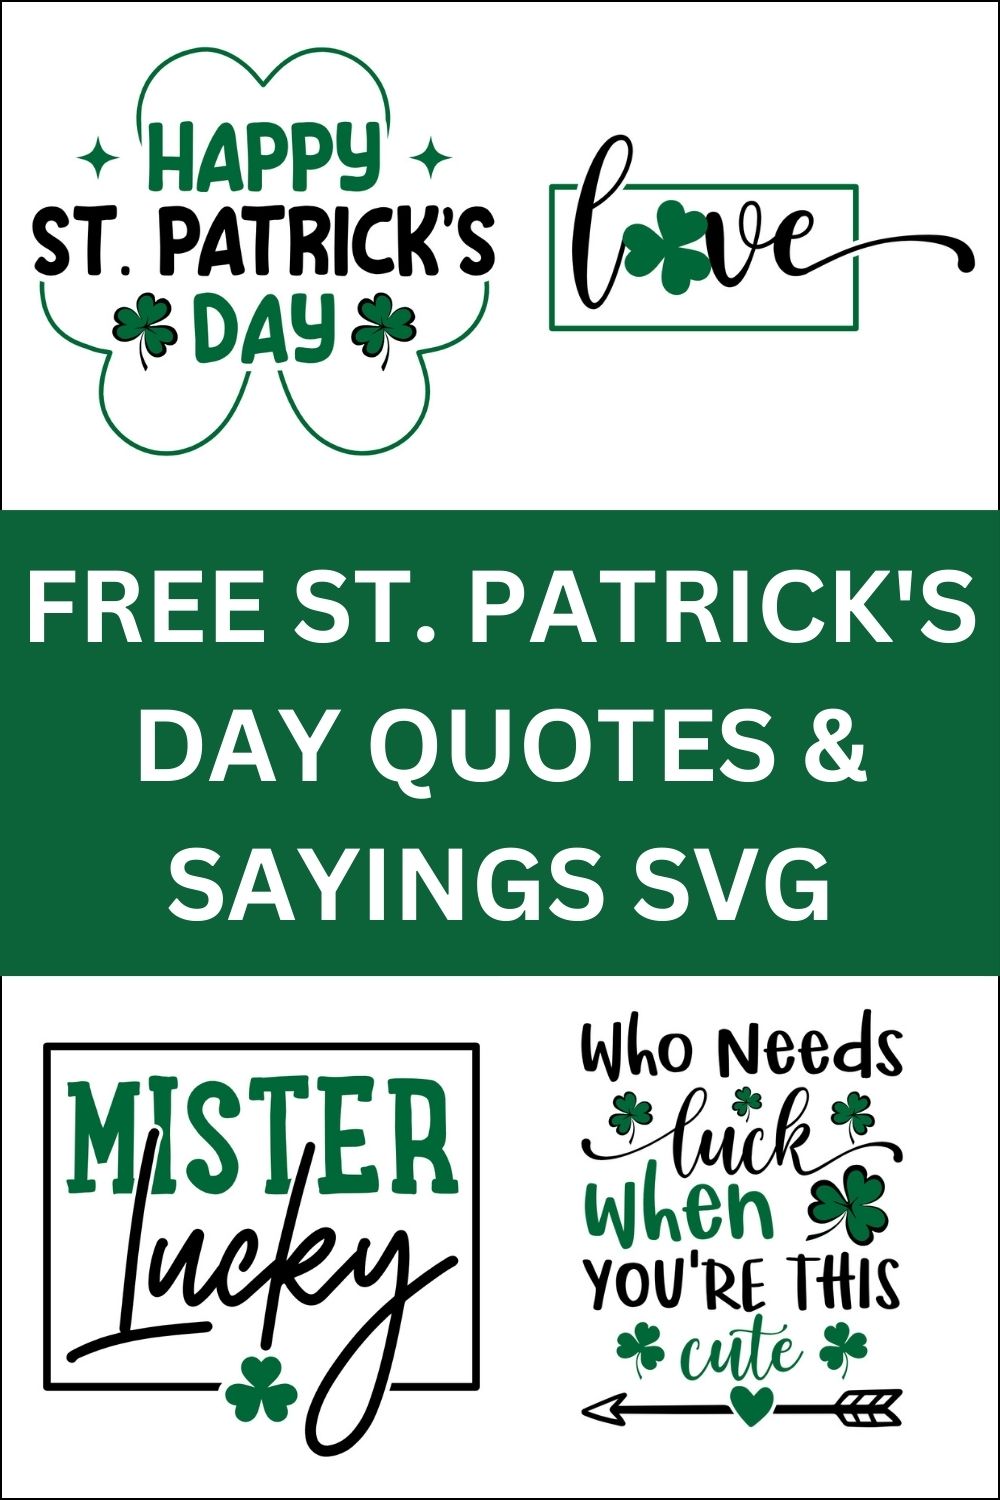 Happy St Patricks Day SVG , Irish SVG , Cut File, Instant Download, Commercial use, Silhouette, Clip art, Lucky Clover, cricut designs, svg files, silhouette, holidays, crafts, embroidery, cut files, vector, card stock, glowforge.